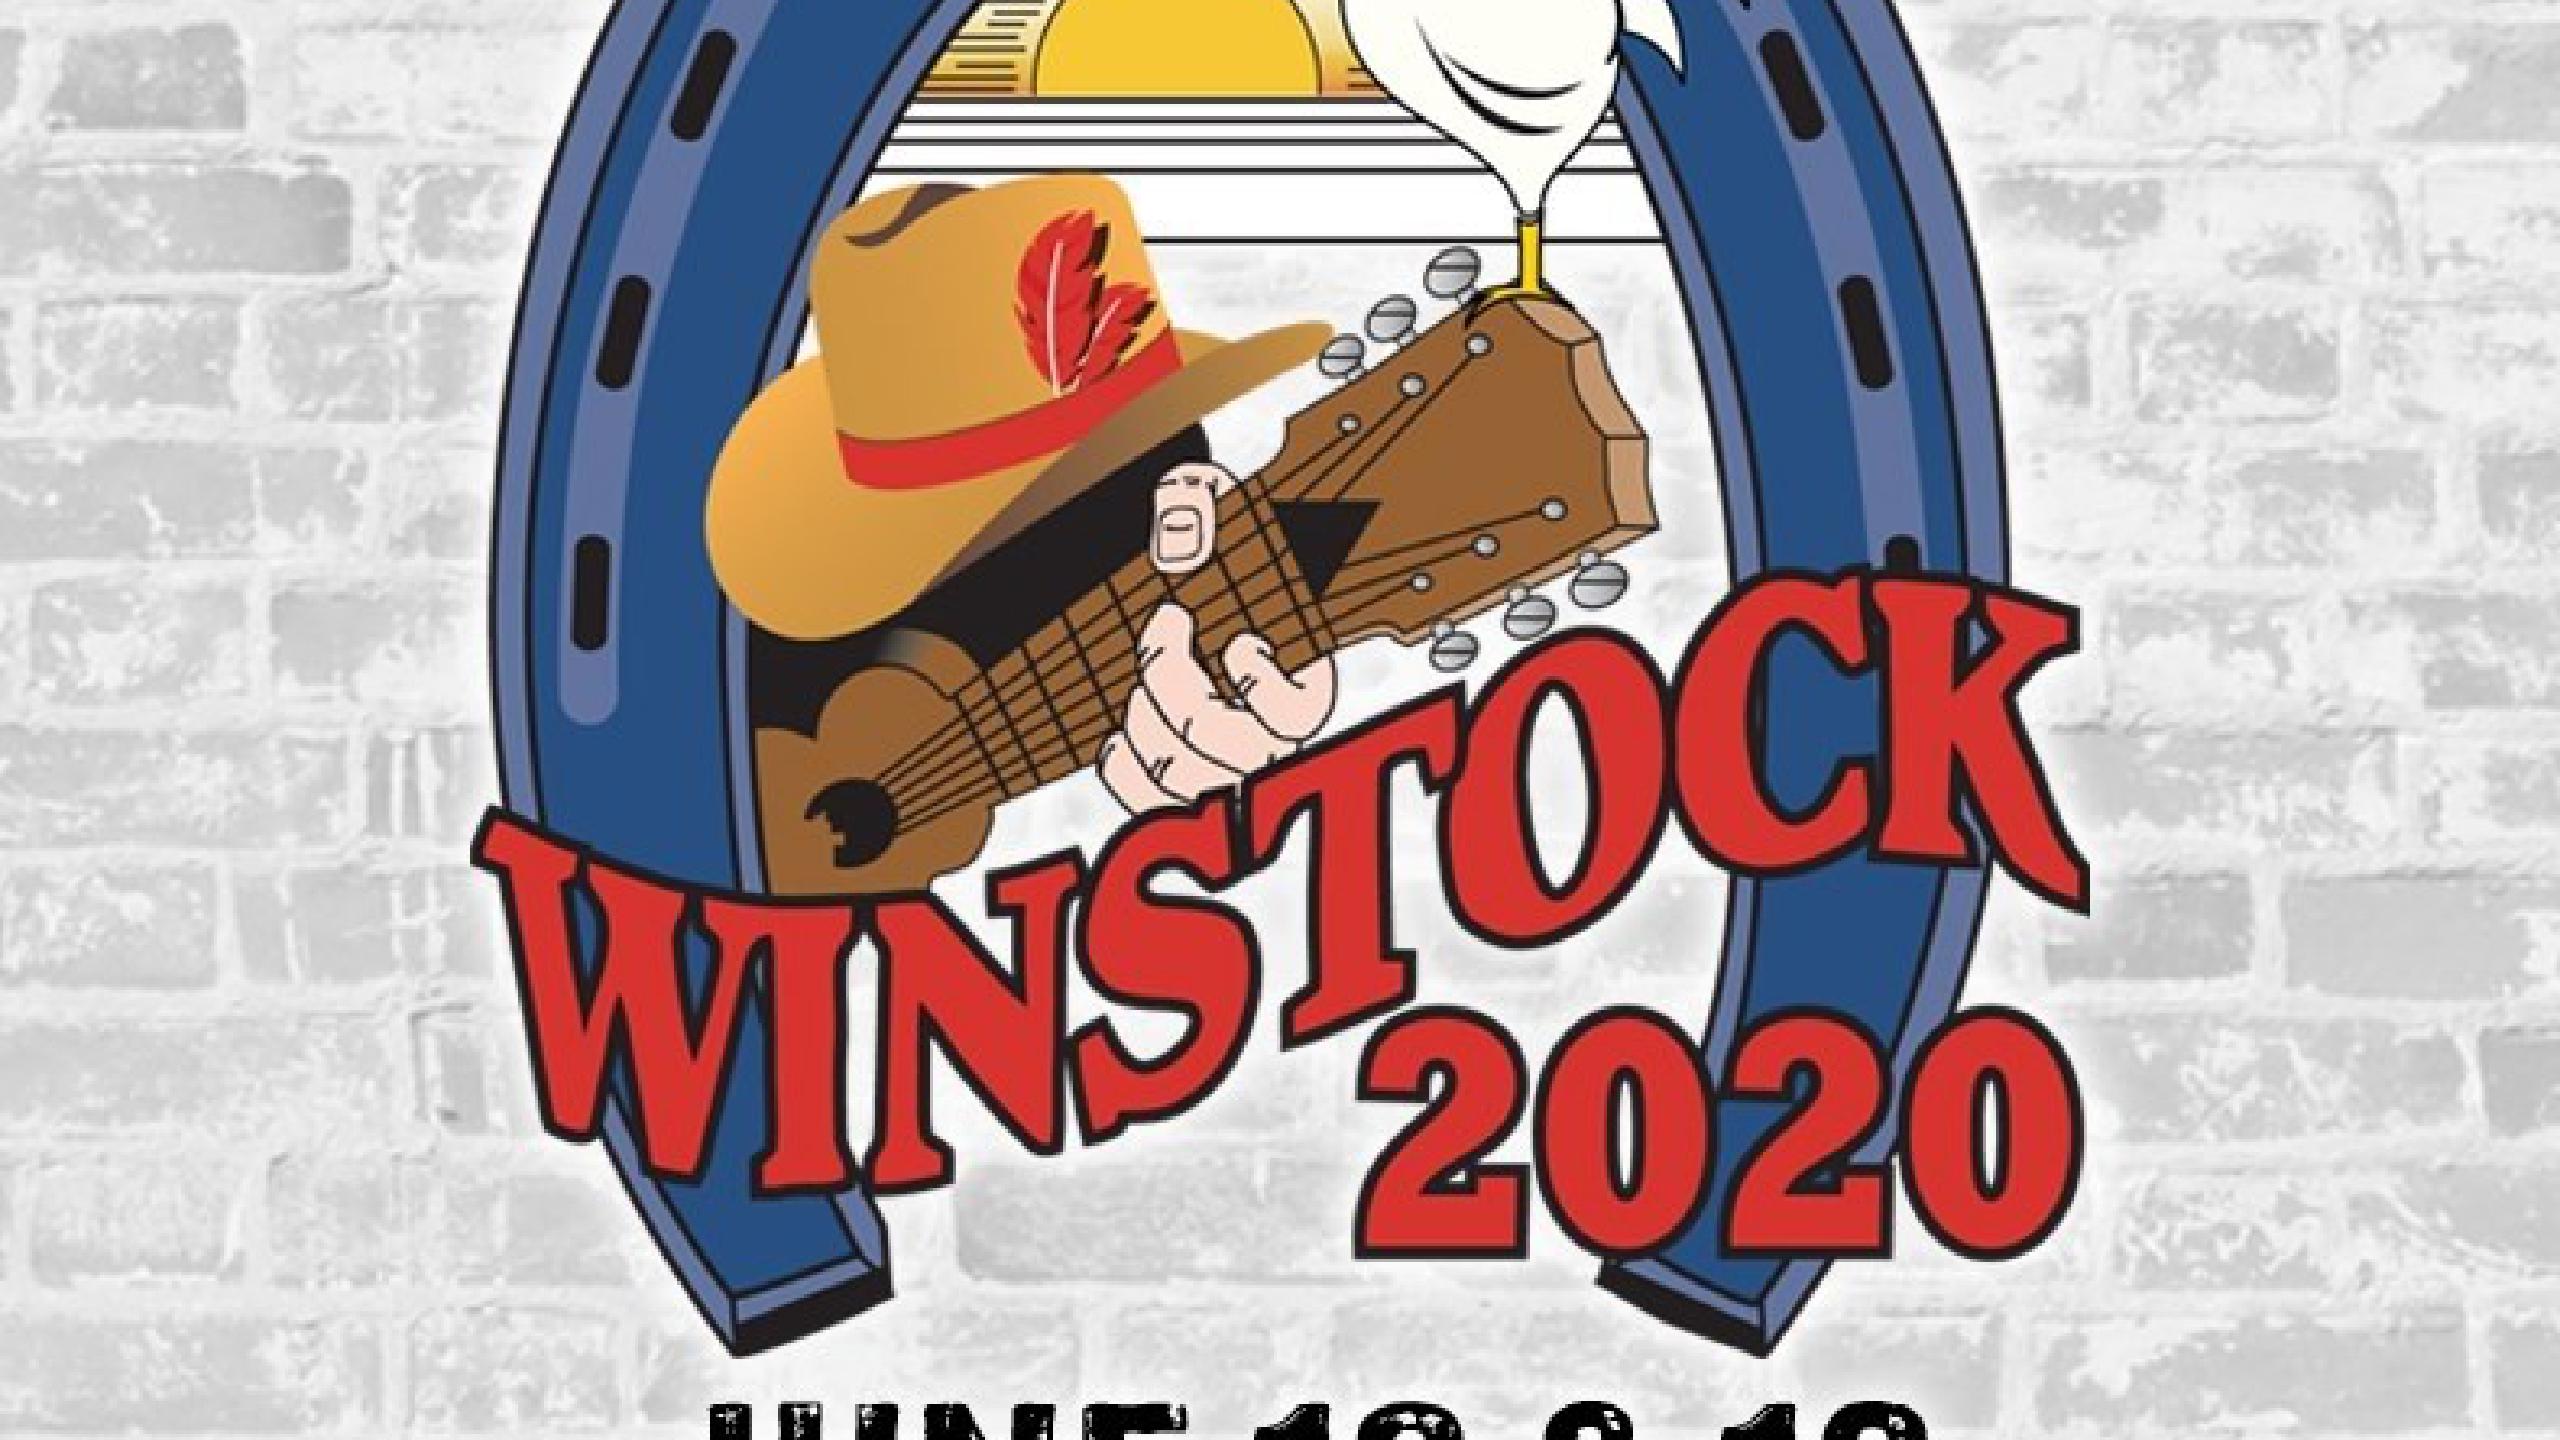 Winstock Country Music Festival 2020. Tickets, lineup, bands for